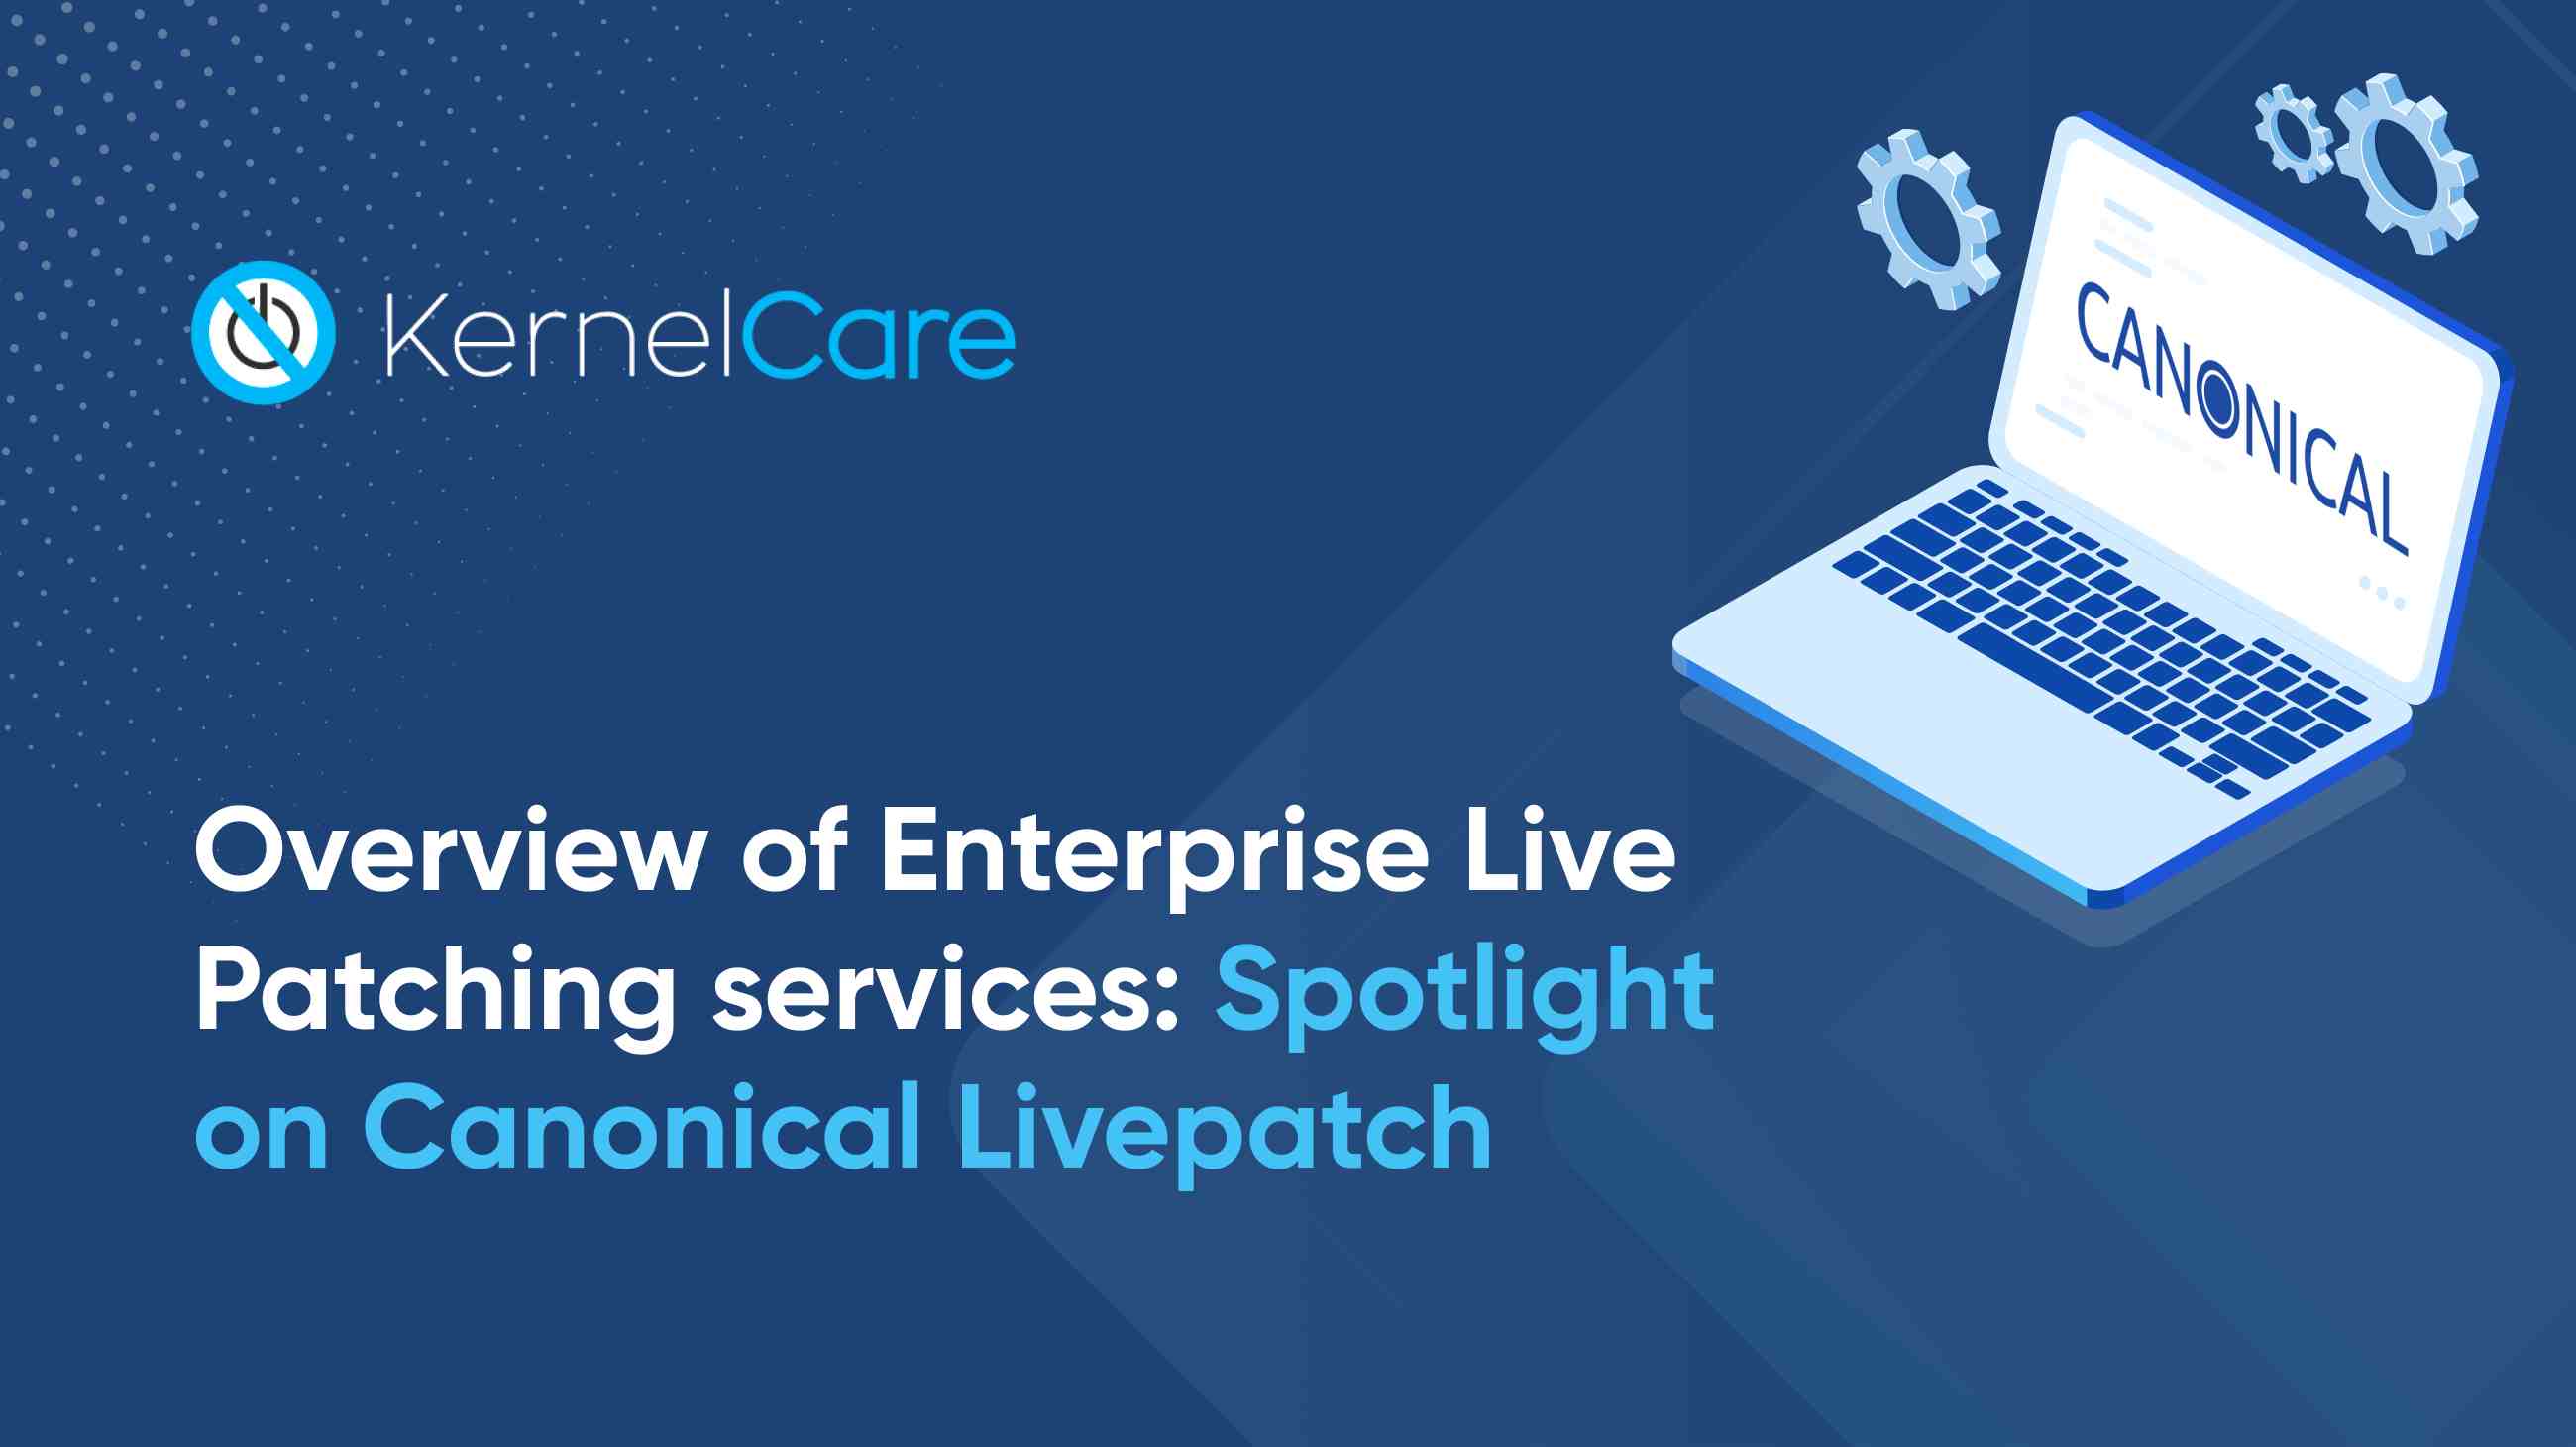 Overview of Enterprise Live Patching services: Canonical Livepatch